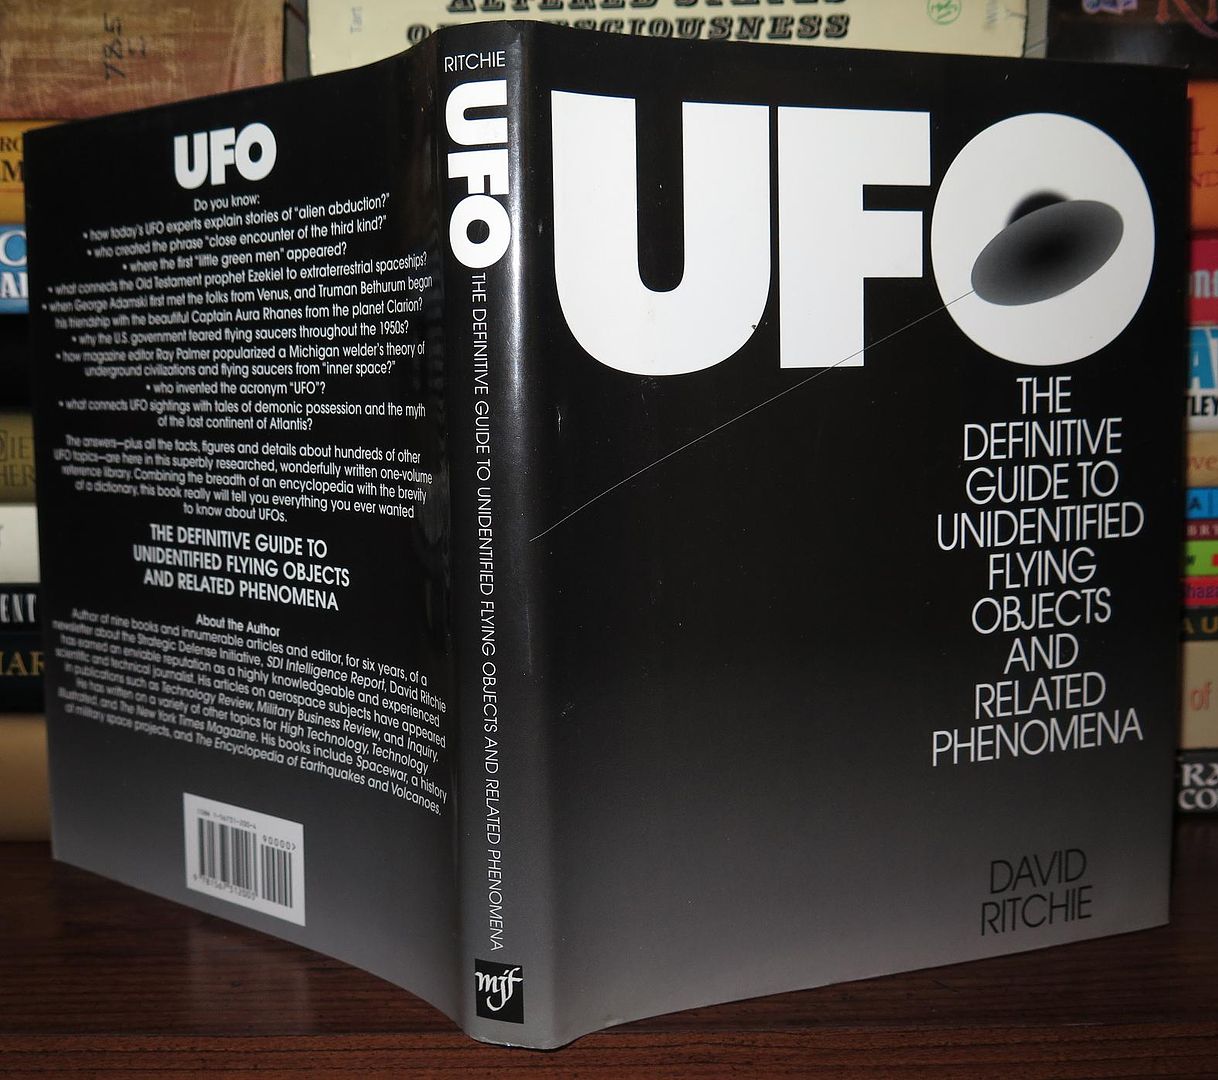 RITCHIE, DAVID - Ufo the Definitive Guide to Unidentified Flying Objects and Related Phenomena